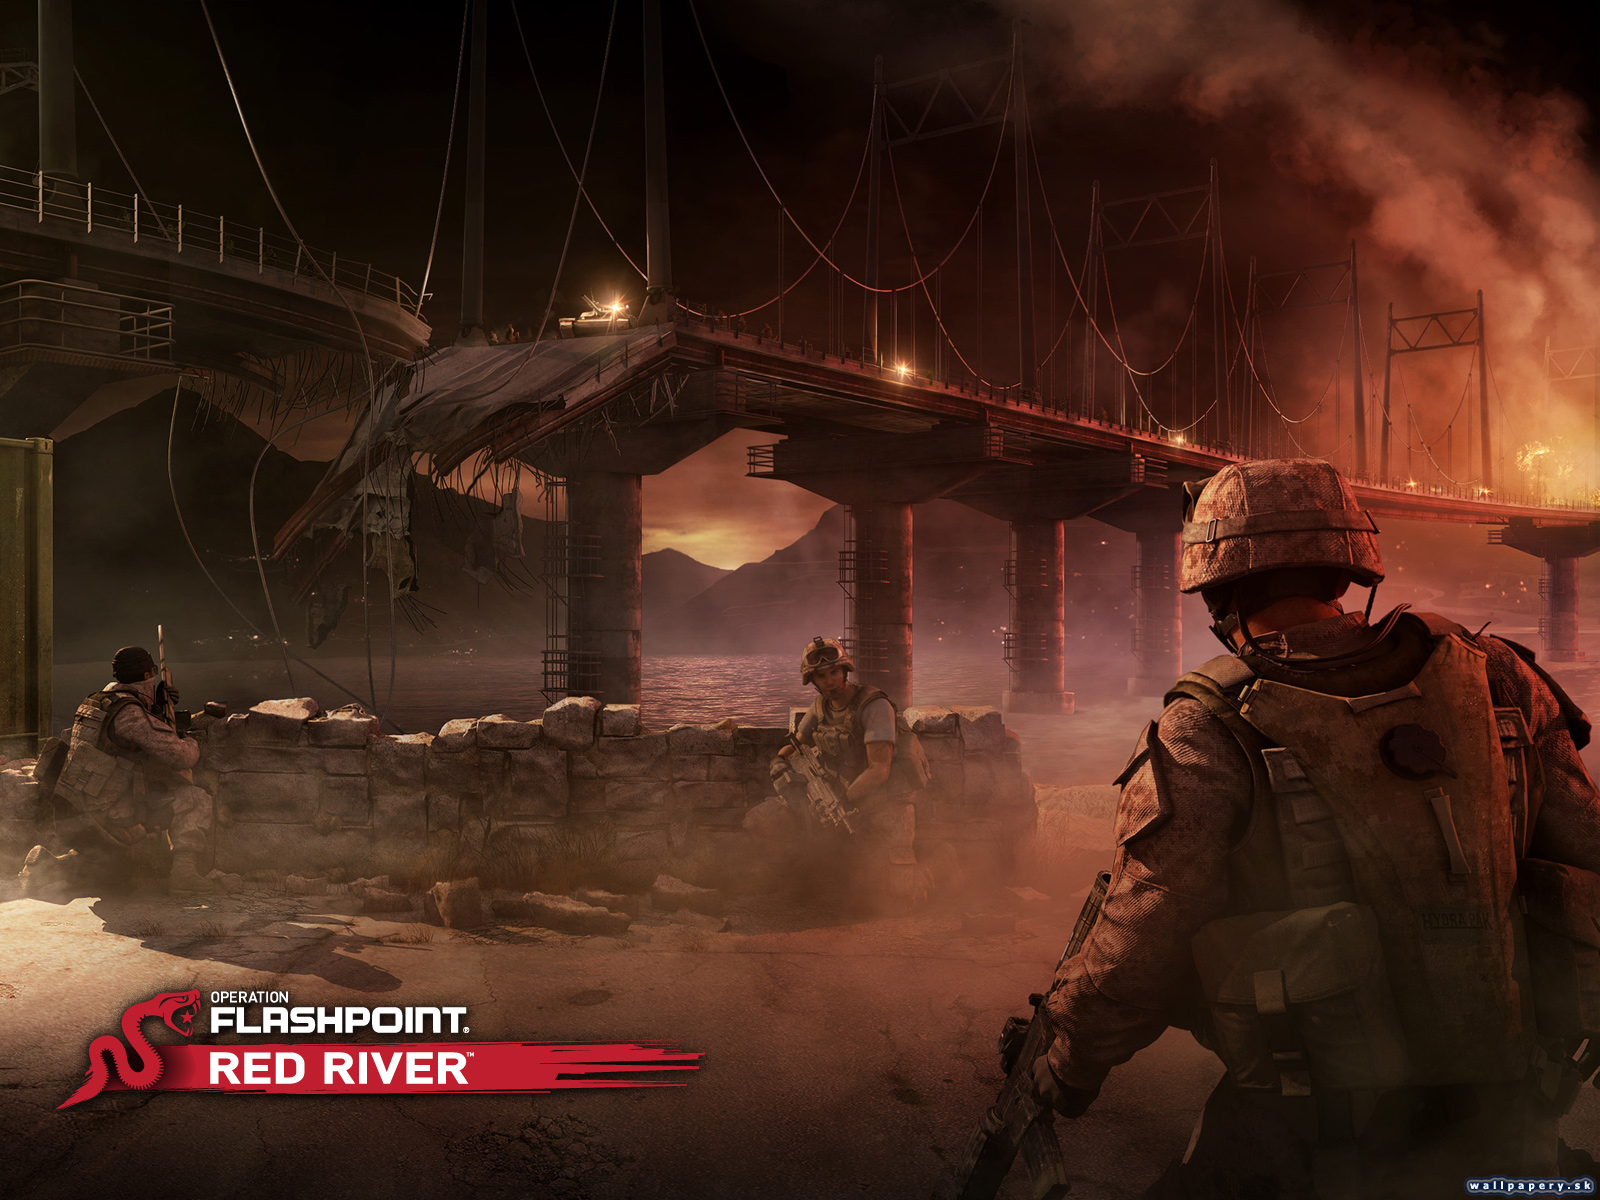 Operation Flashpoint: Red River - wallpaper 12